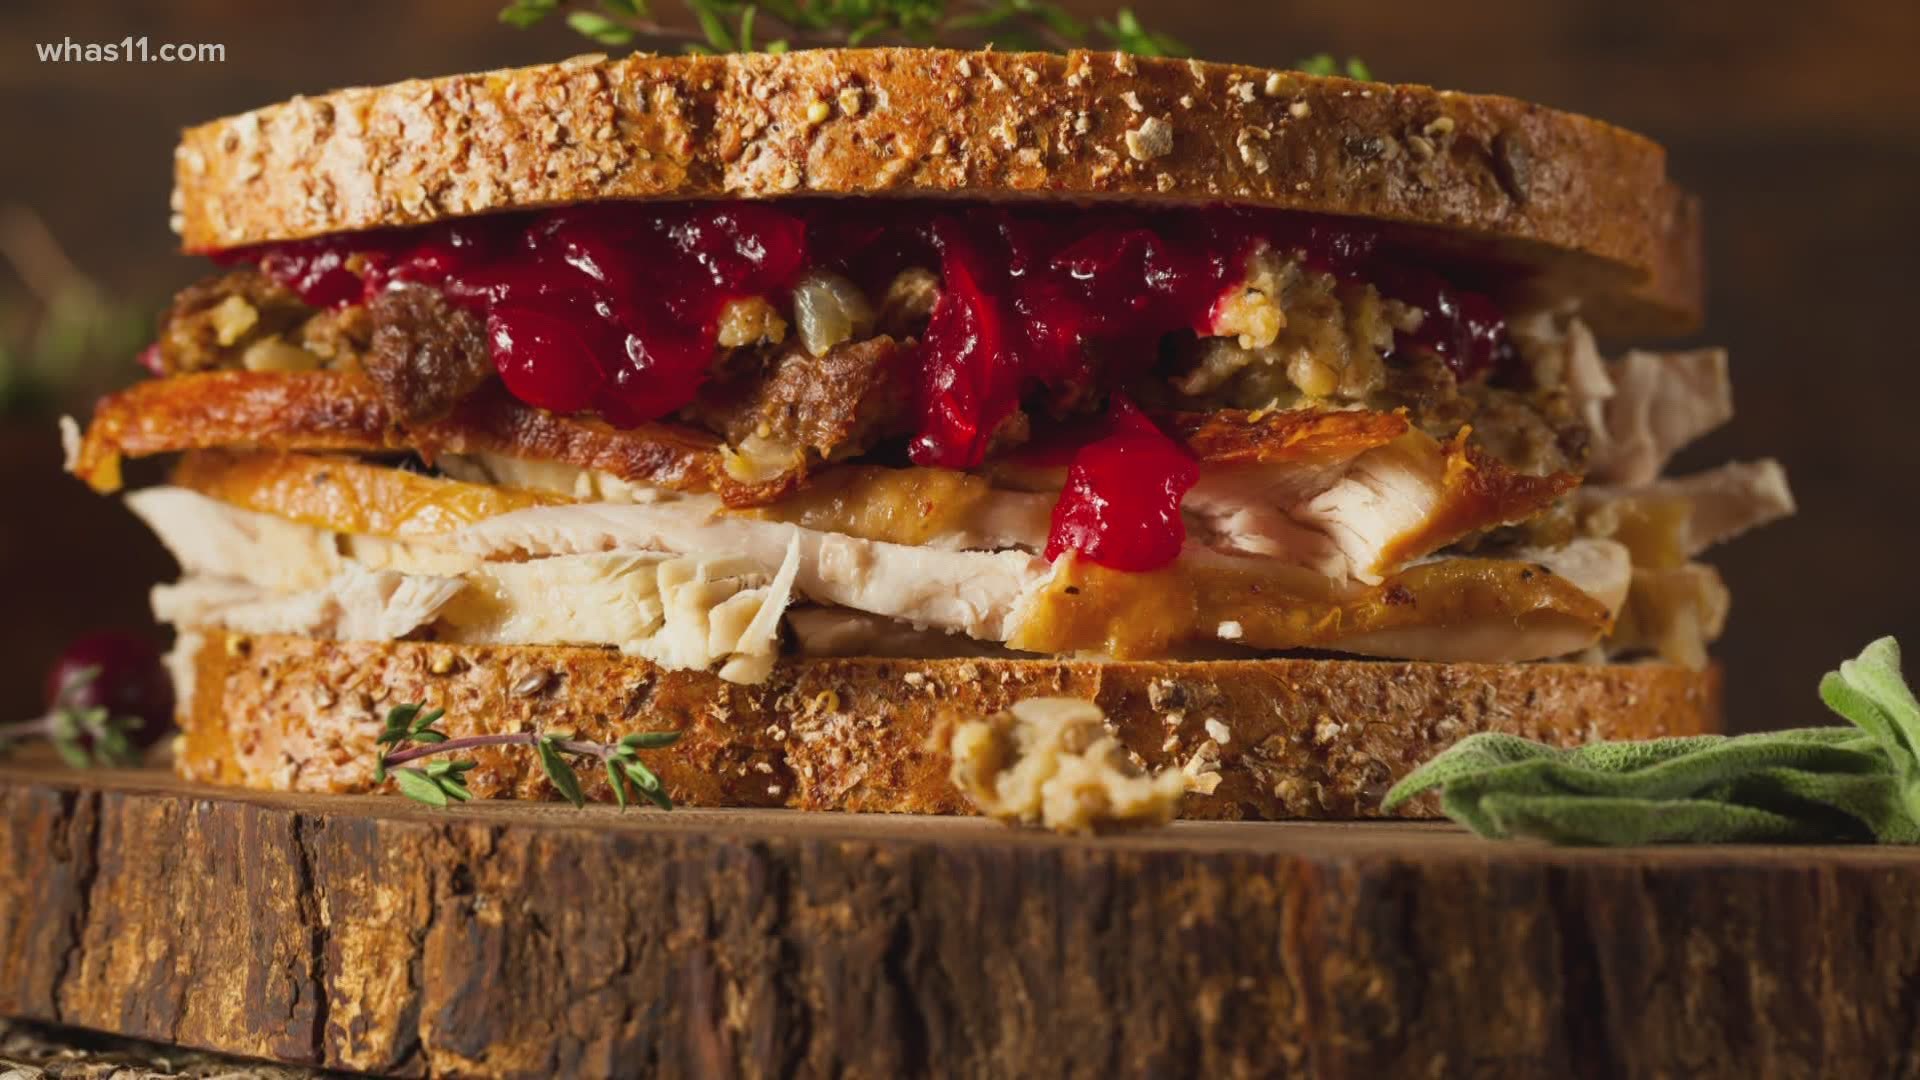 If you want to enjoy your Thanksgiving leftovers, you need to make sure you eat them pretty quickly, according to health experts.